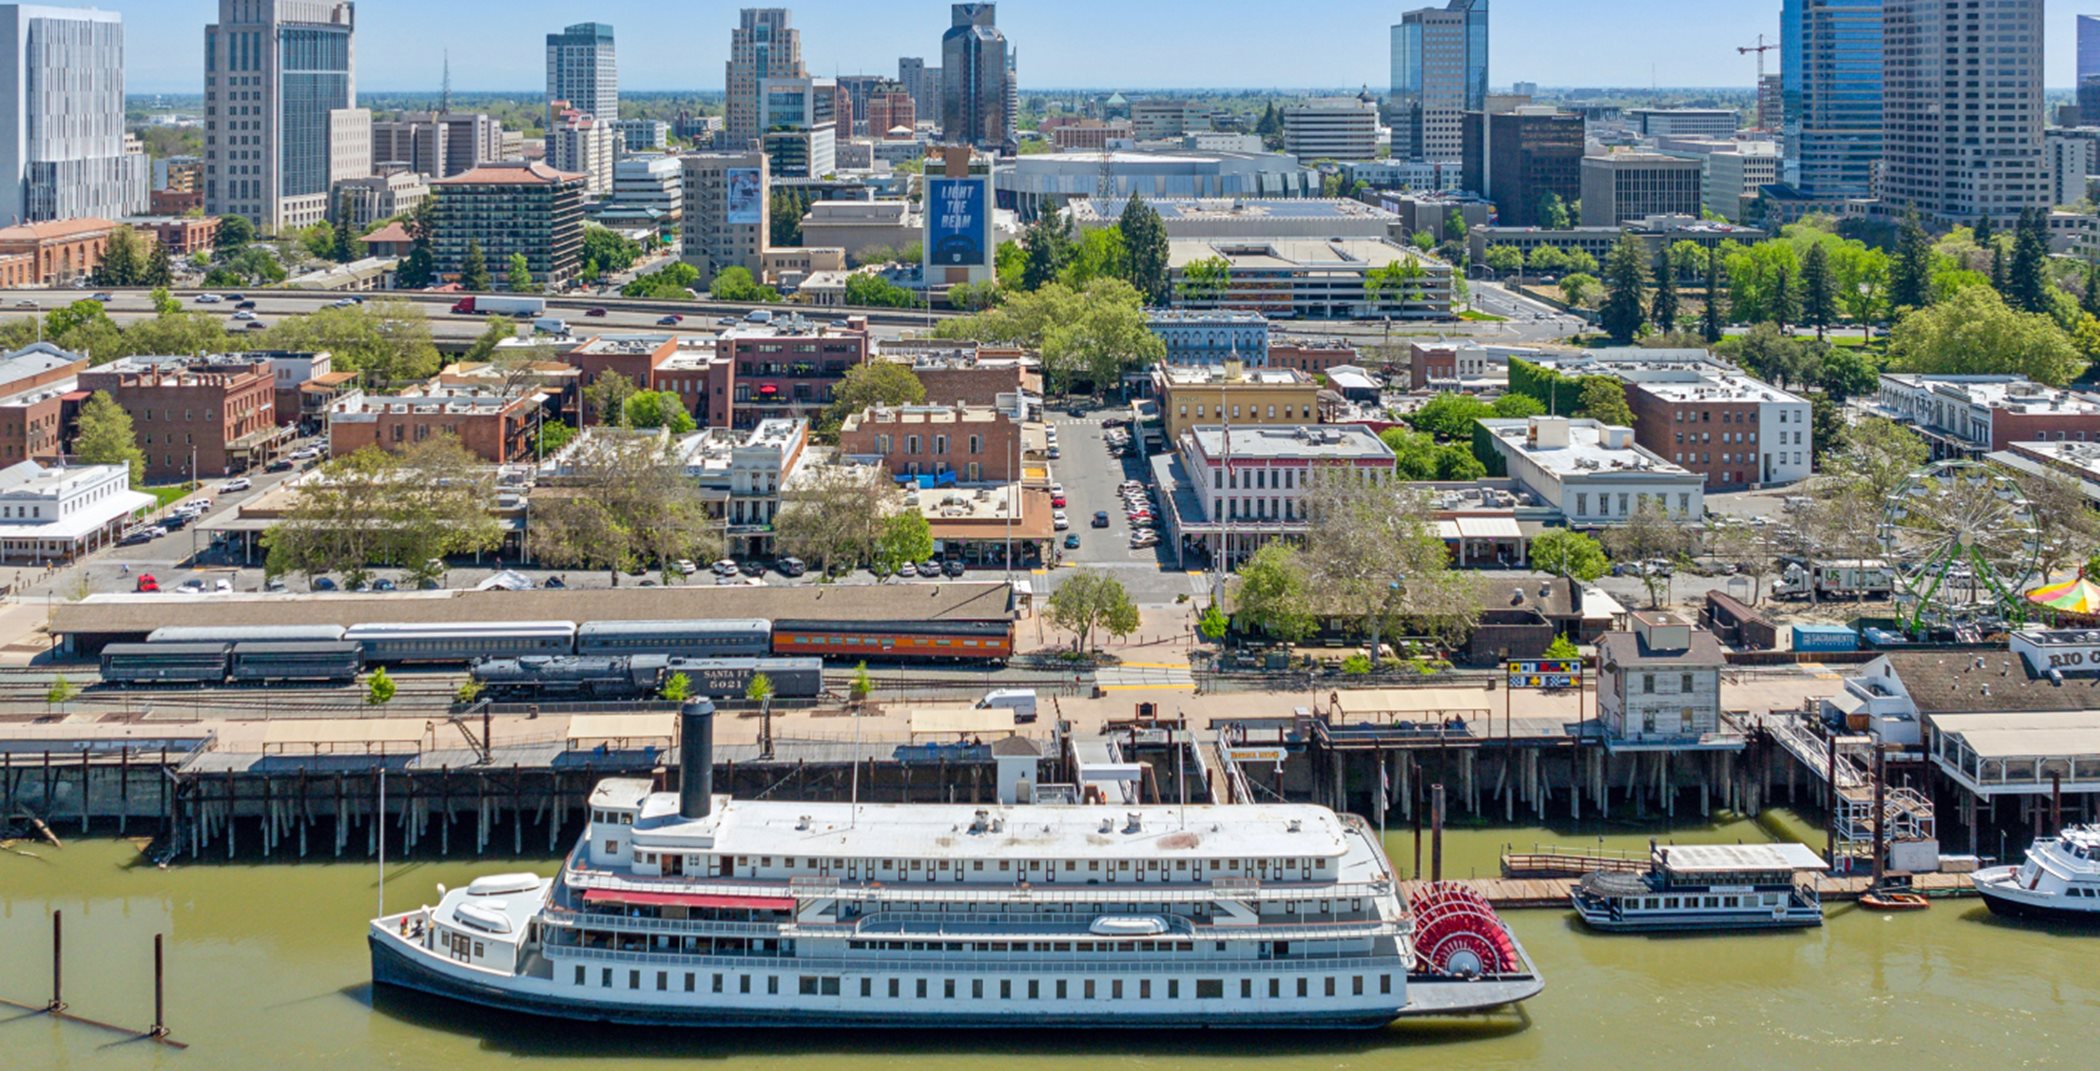 Aerial view of a boat at the Old Sacramento Waterfront